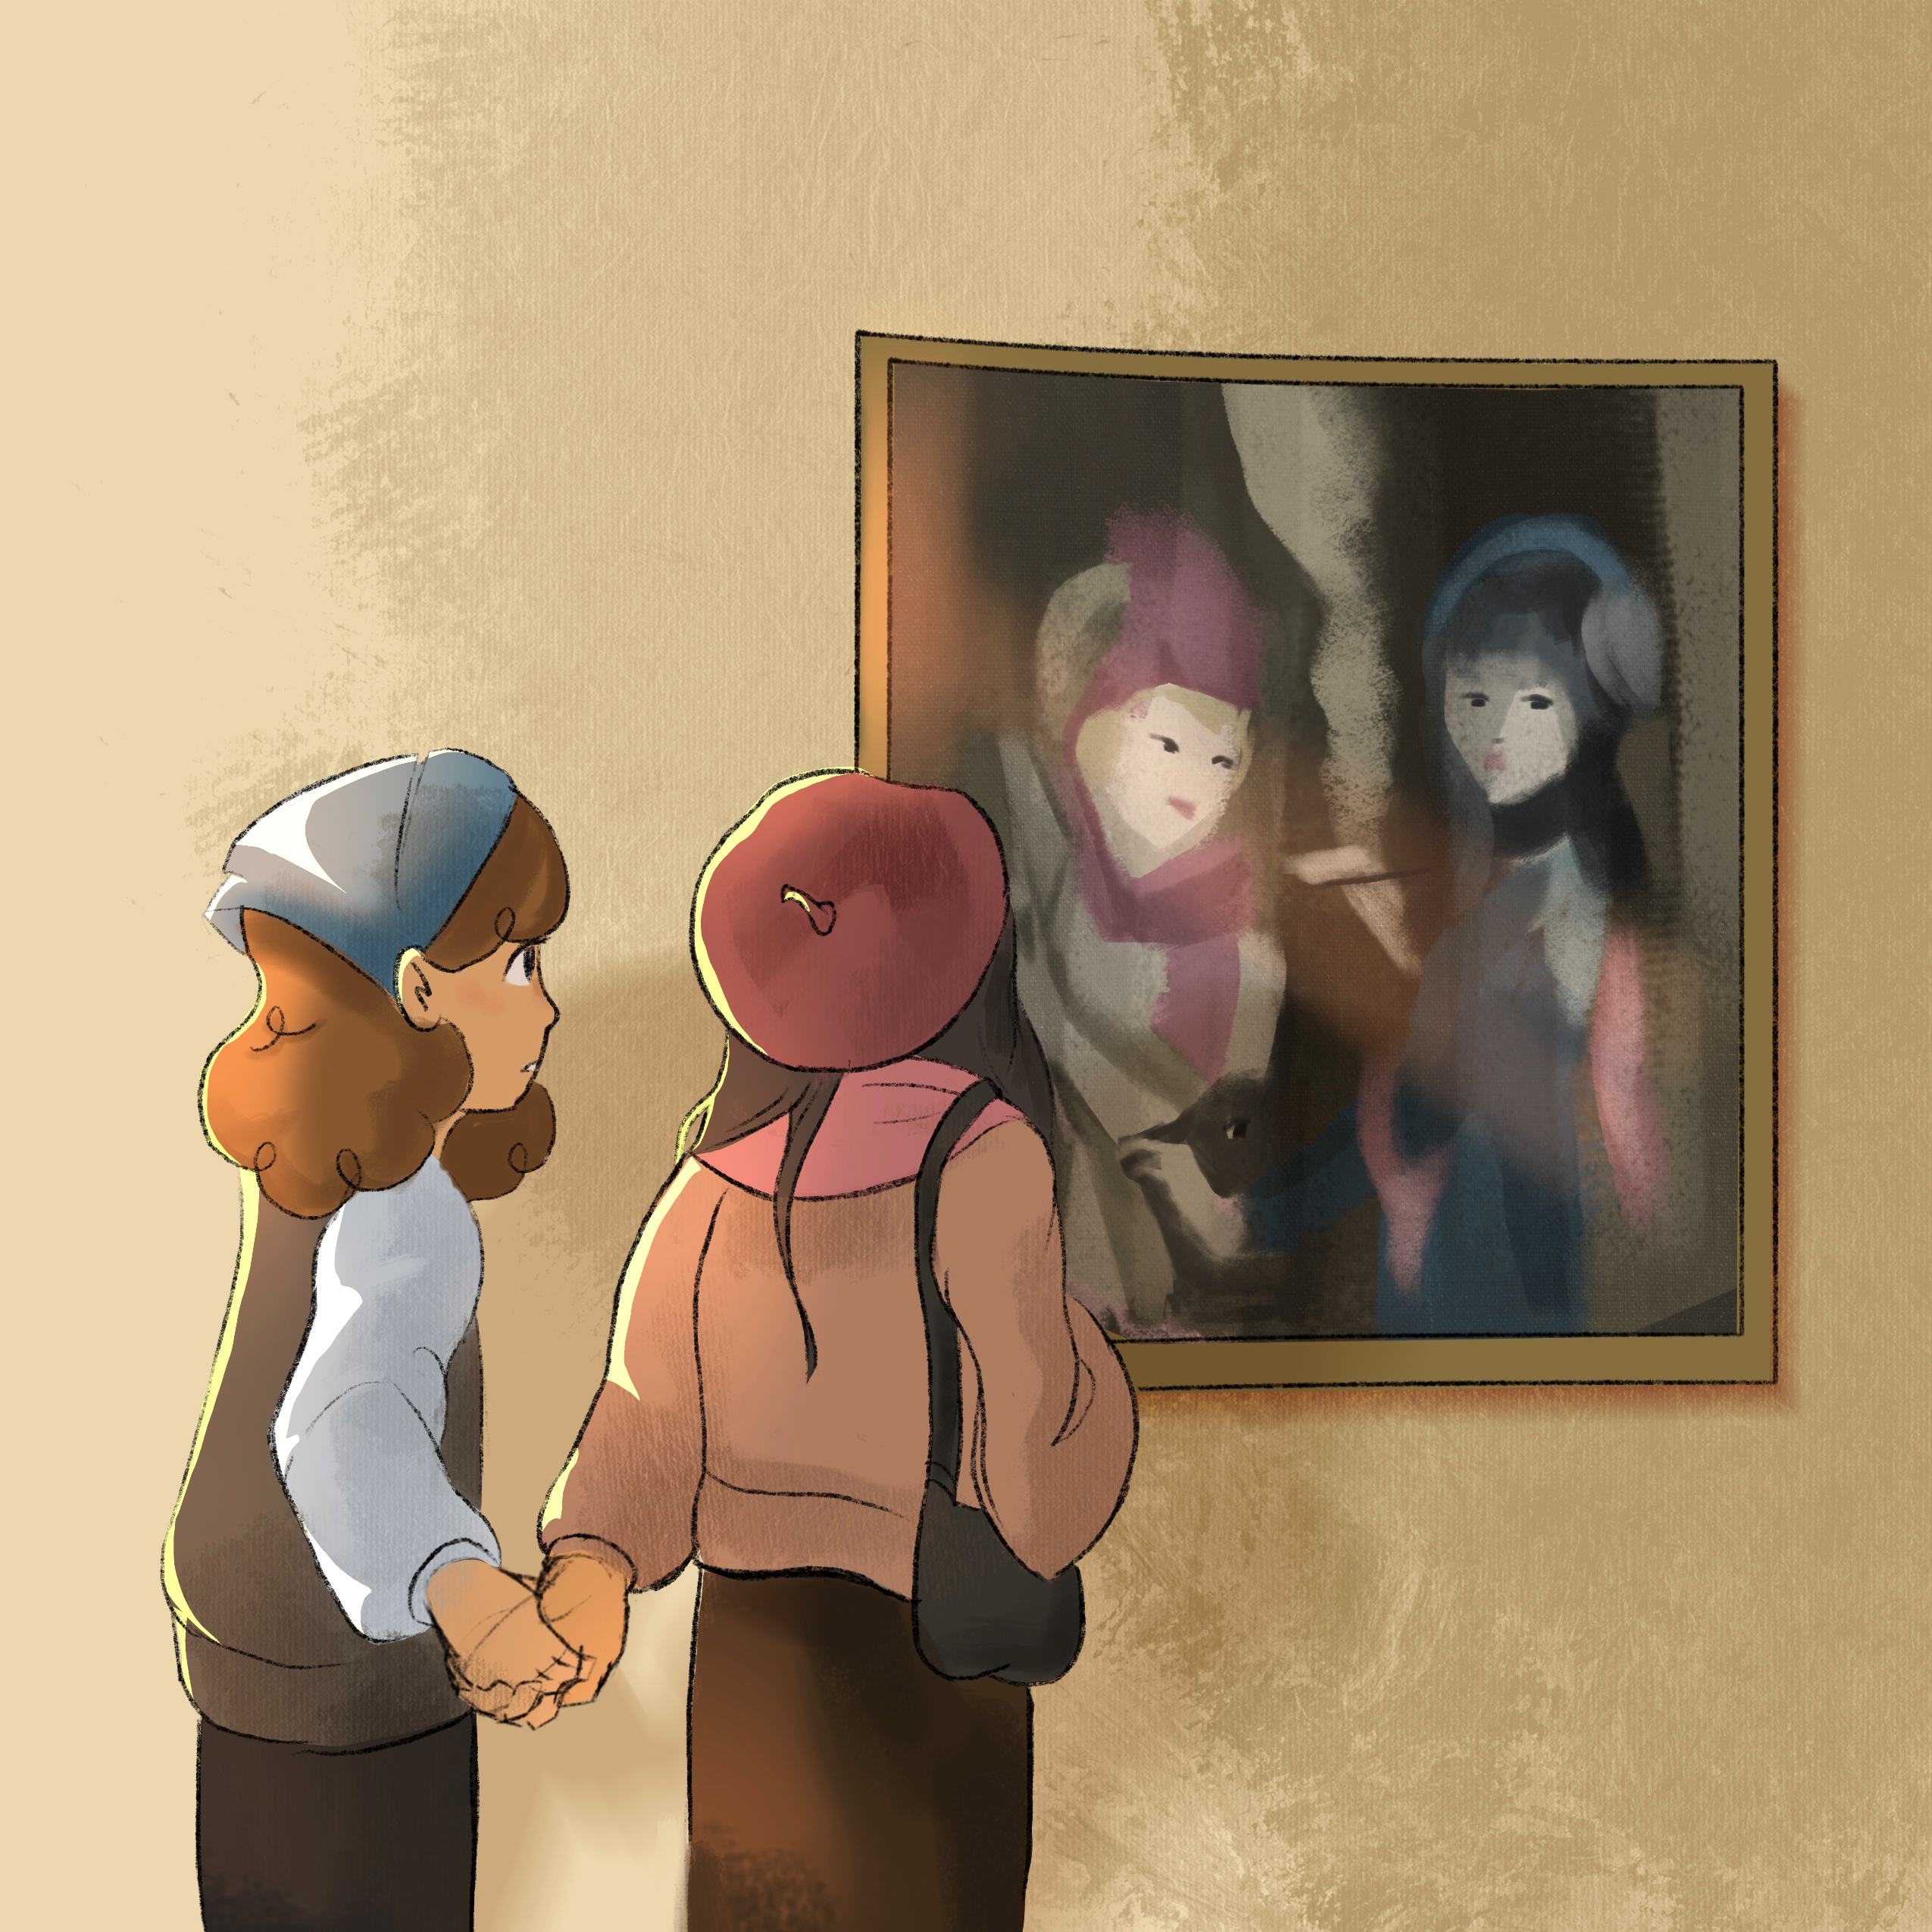 A digital illustration of two women holding hands and looking at a painting of two women. The couple's clothing color palette matches the two women's clothing in the painting. The woman on the left has light brown skin, curly brown hair, a blue bandana, and a brown vest over a light blue long-sleeve shirt. The woman on the right has light skin, straight brown hair, a red beret, a tan shirt, and a black purse. The women in the painting wear a red scarf and a blue scarf respectively.